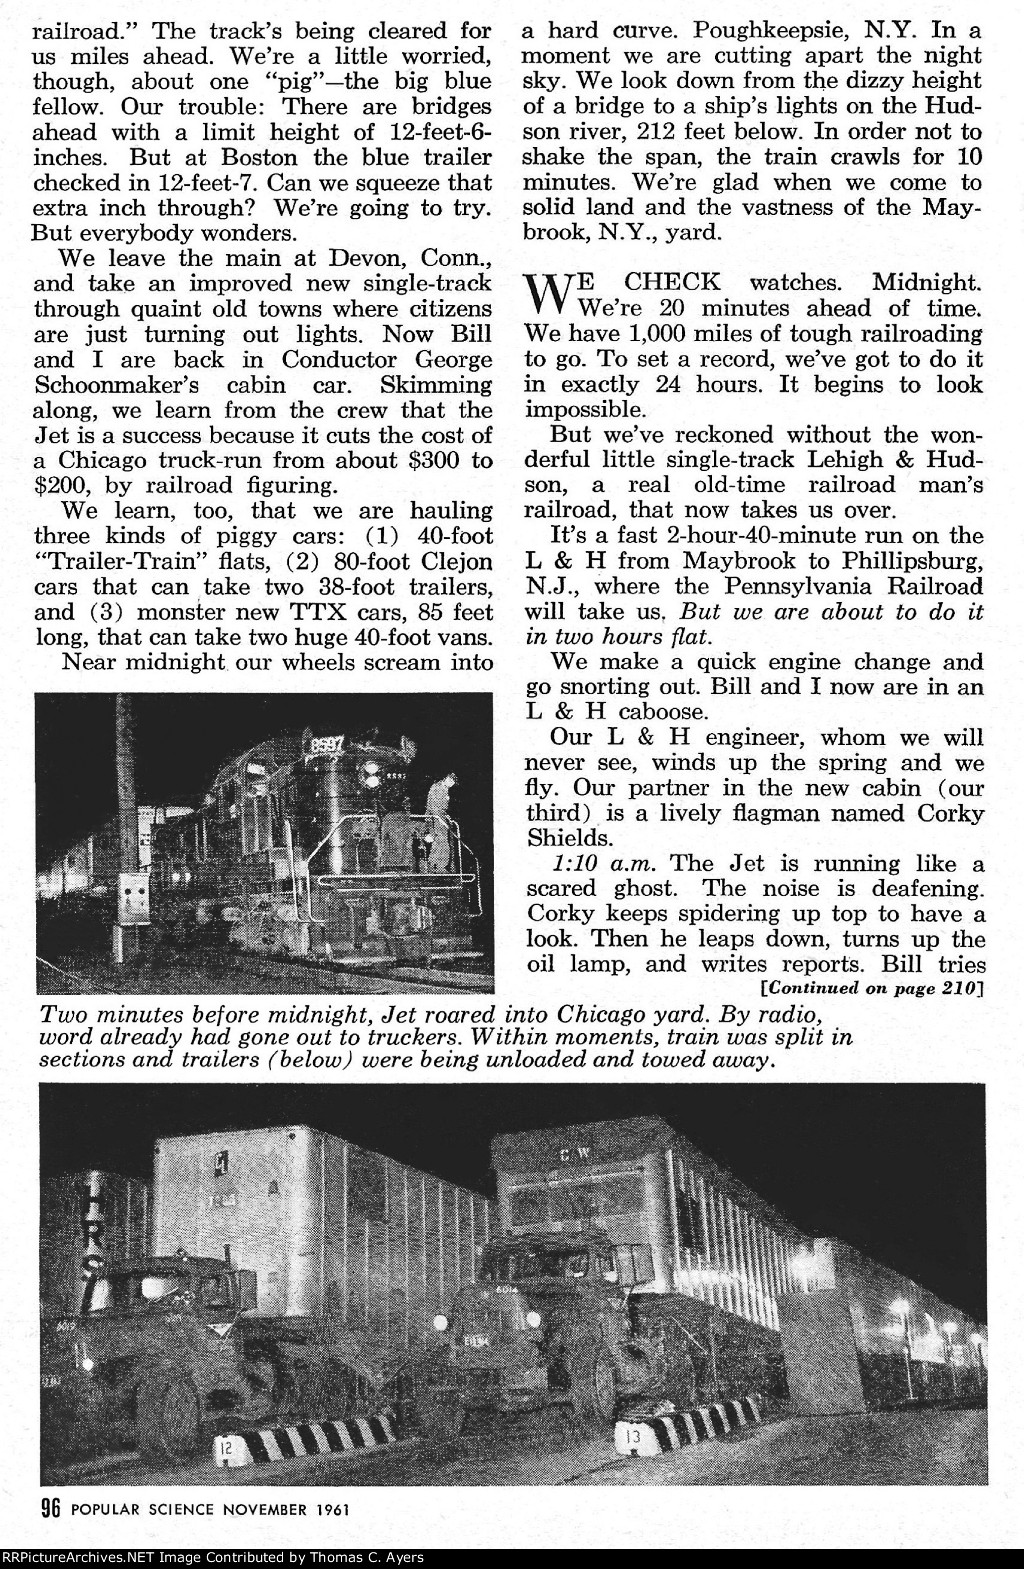 "Record-Breaking Ride On New Super-Freight," Page 96, 1961